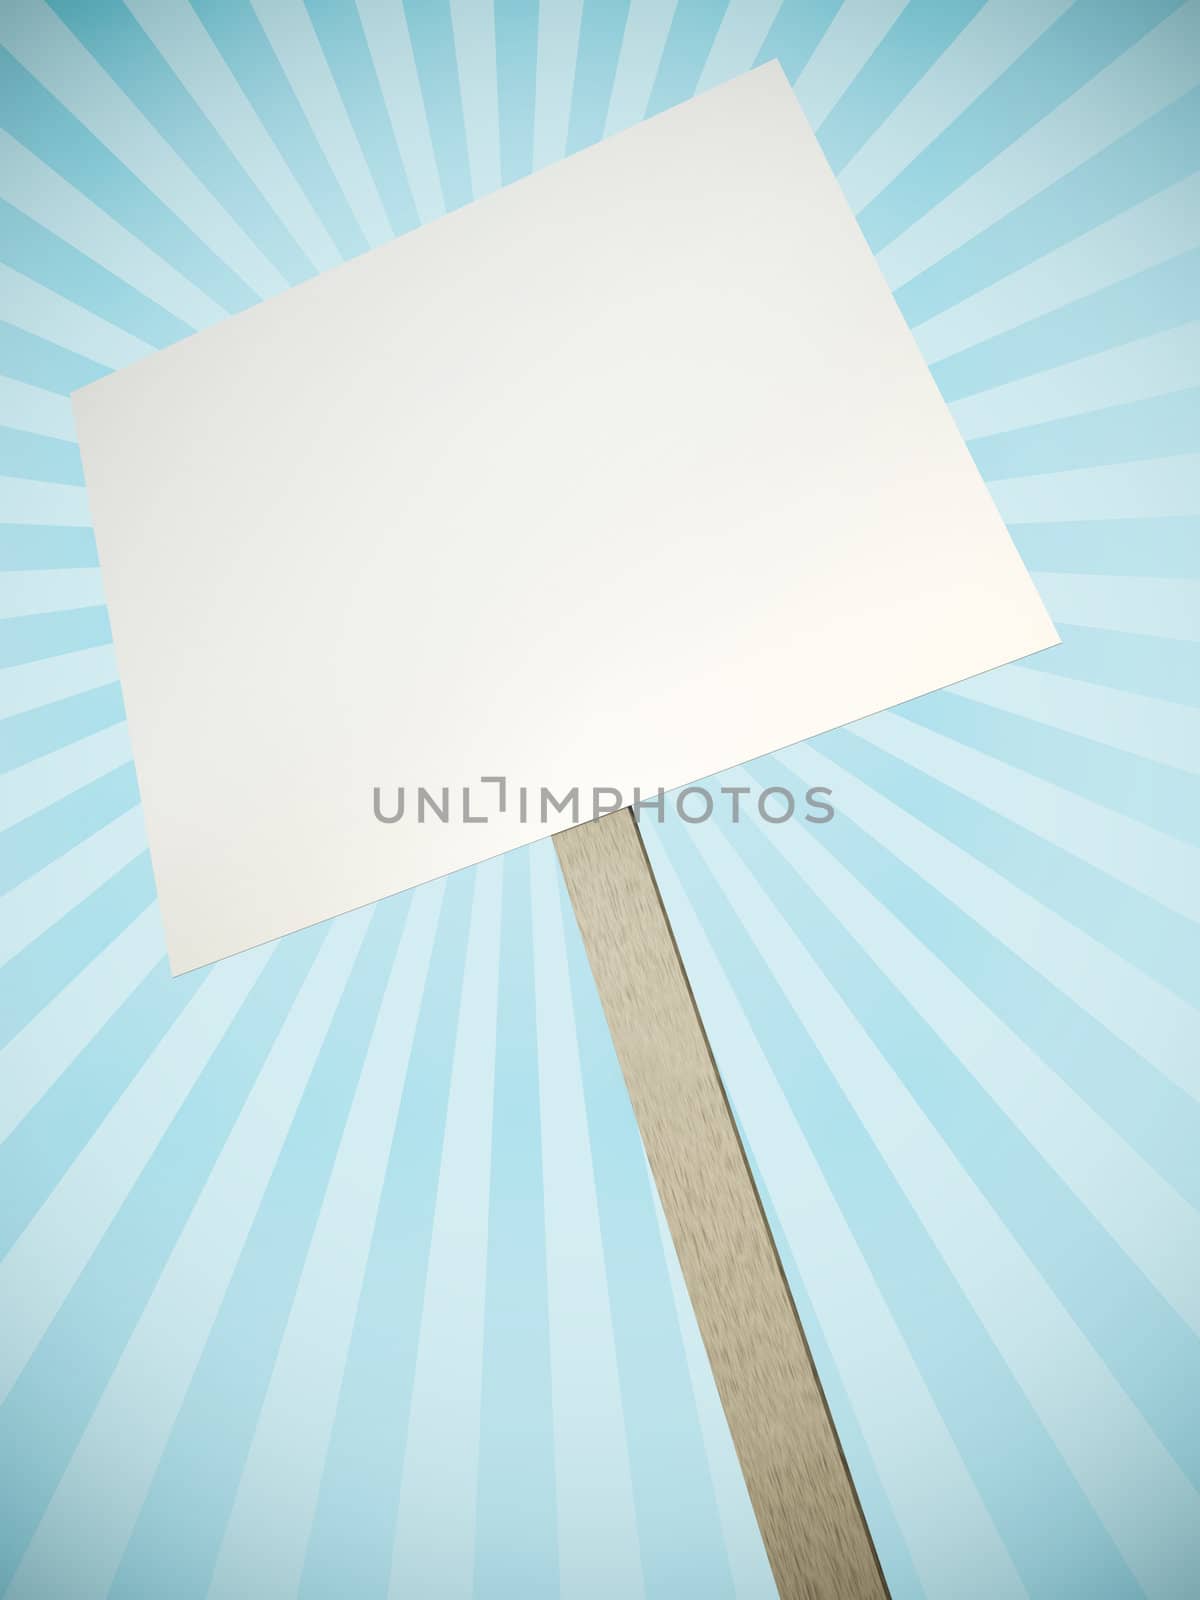 Blank protest banner with decorative rays in the background. 3D render.